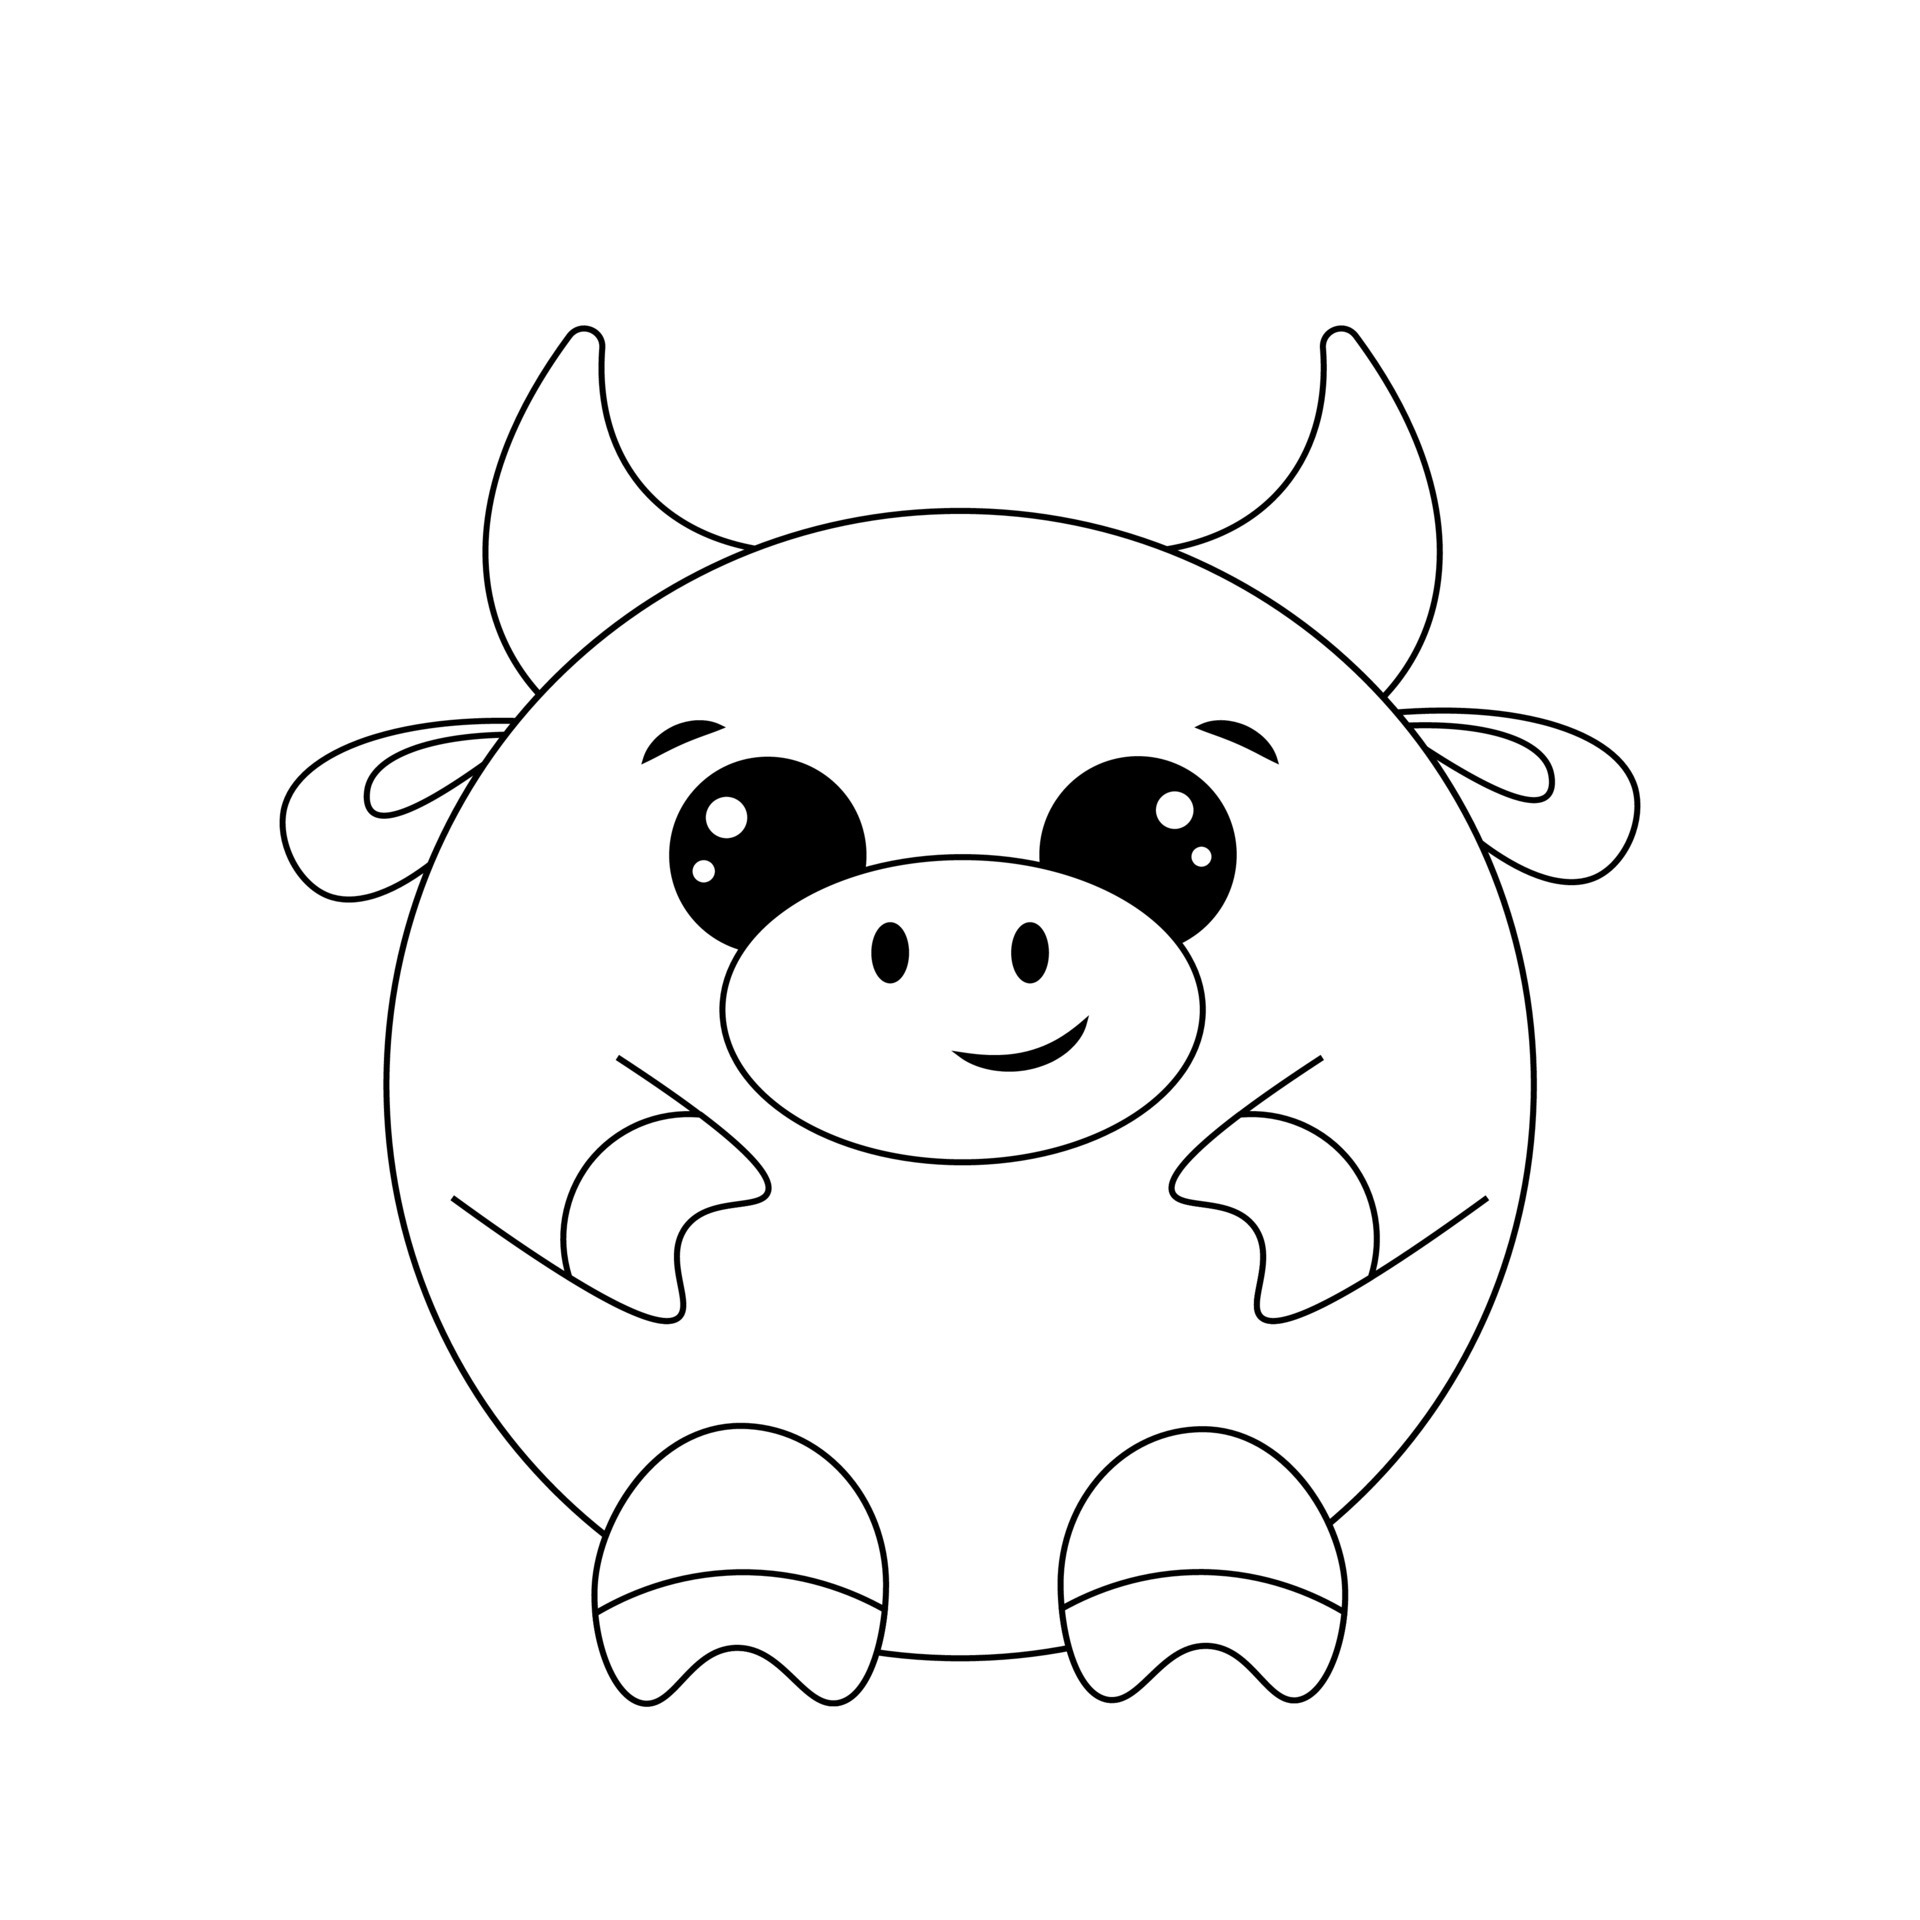 Cute cartoon round Bull. Draw illustration in black and white 7165387 ...